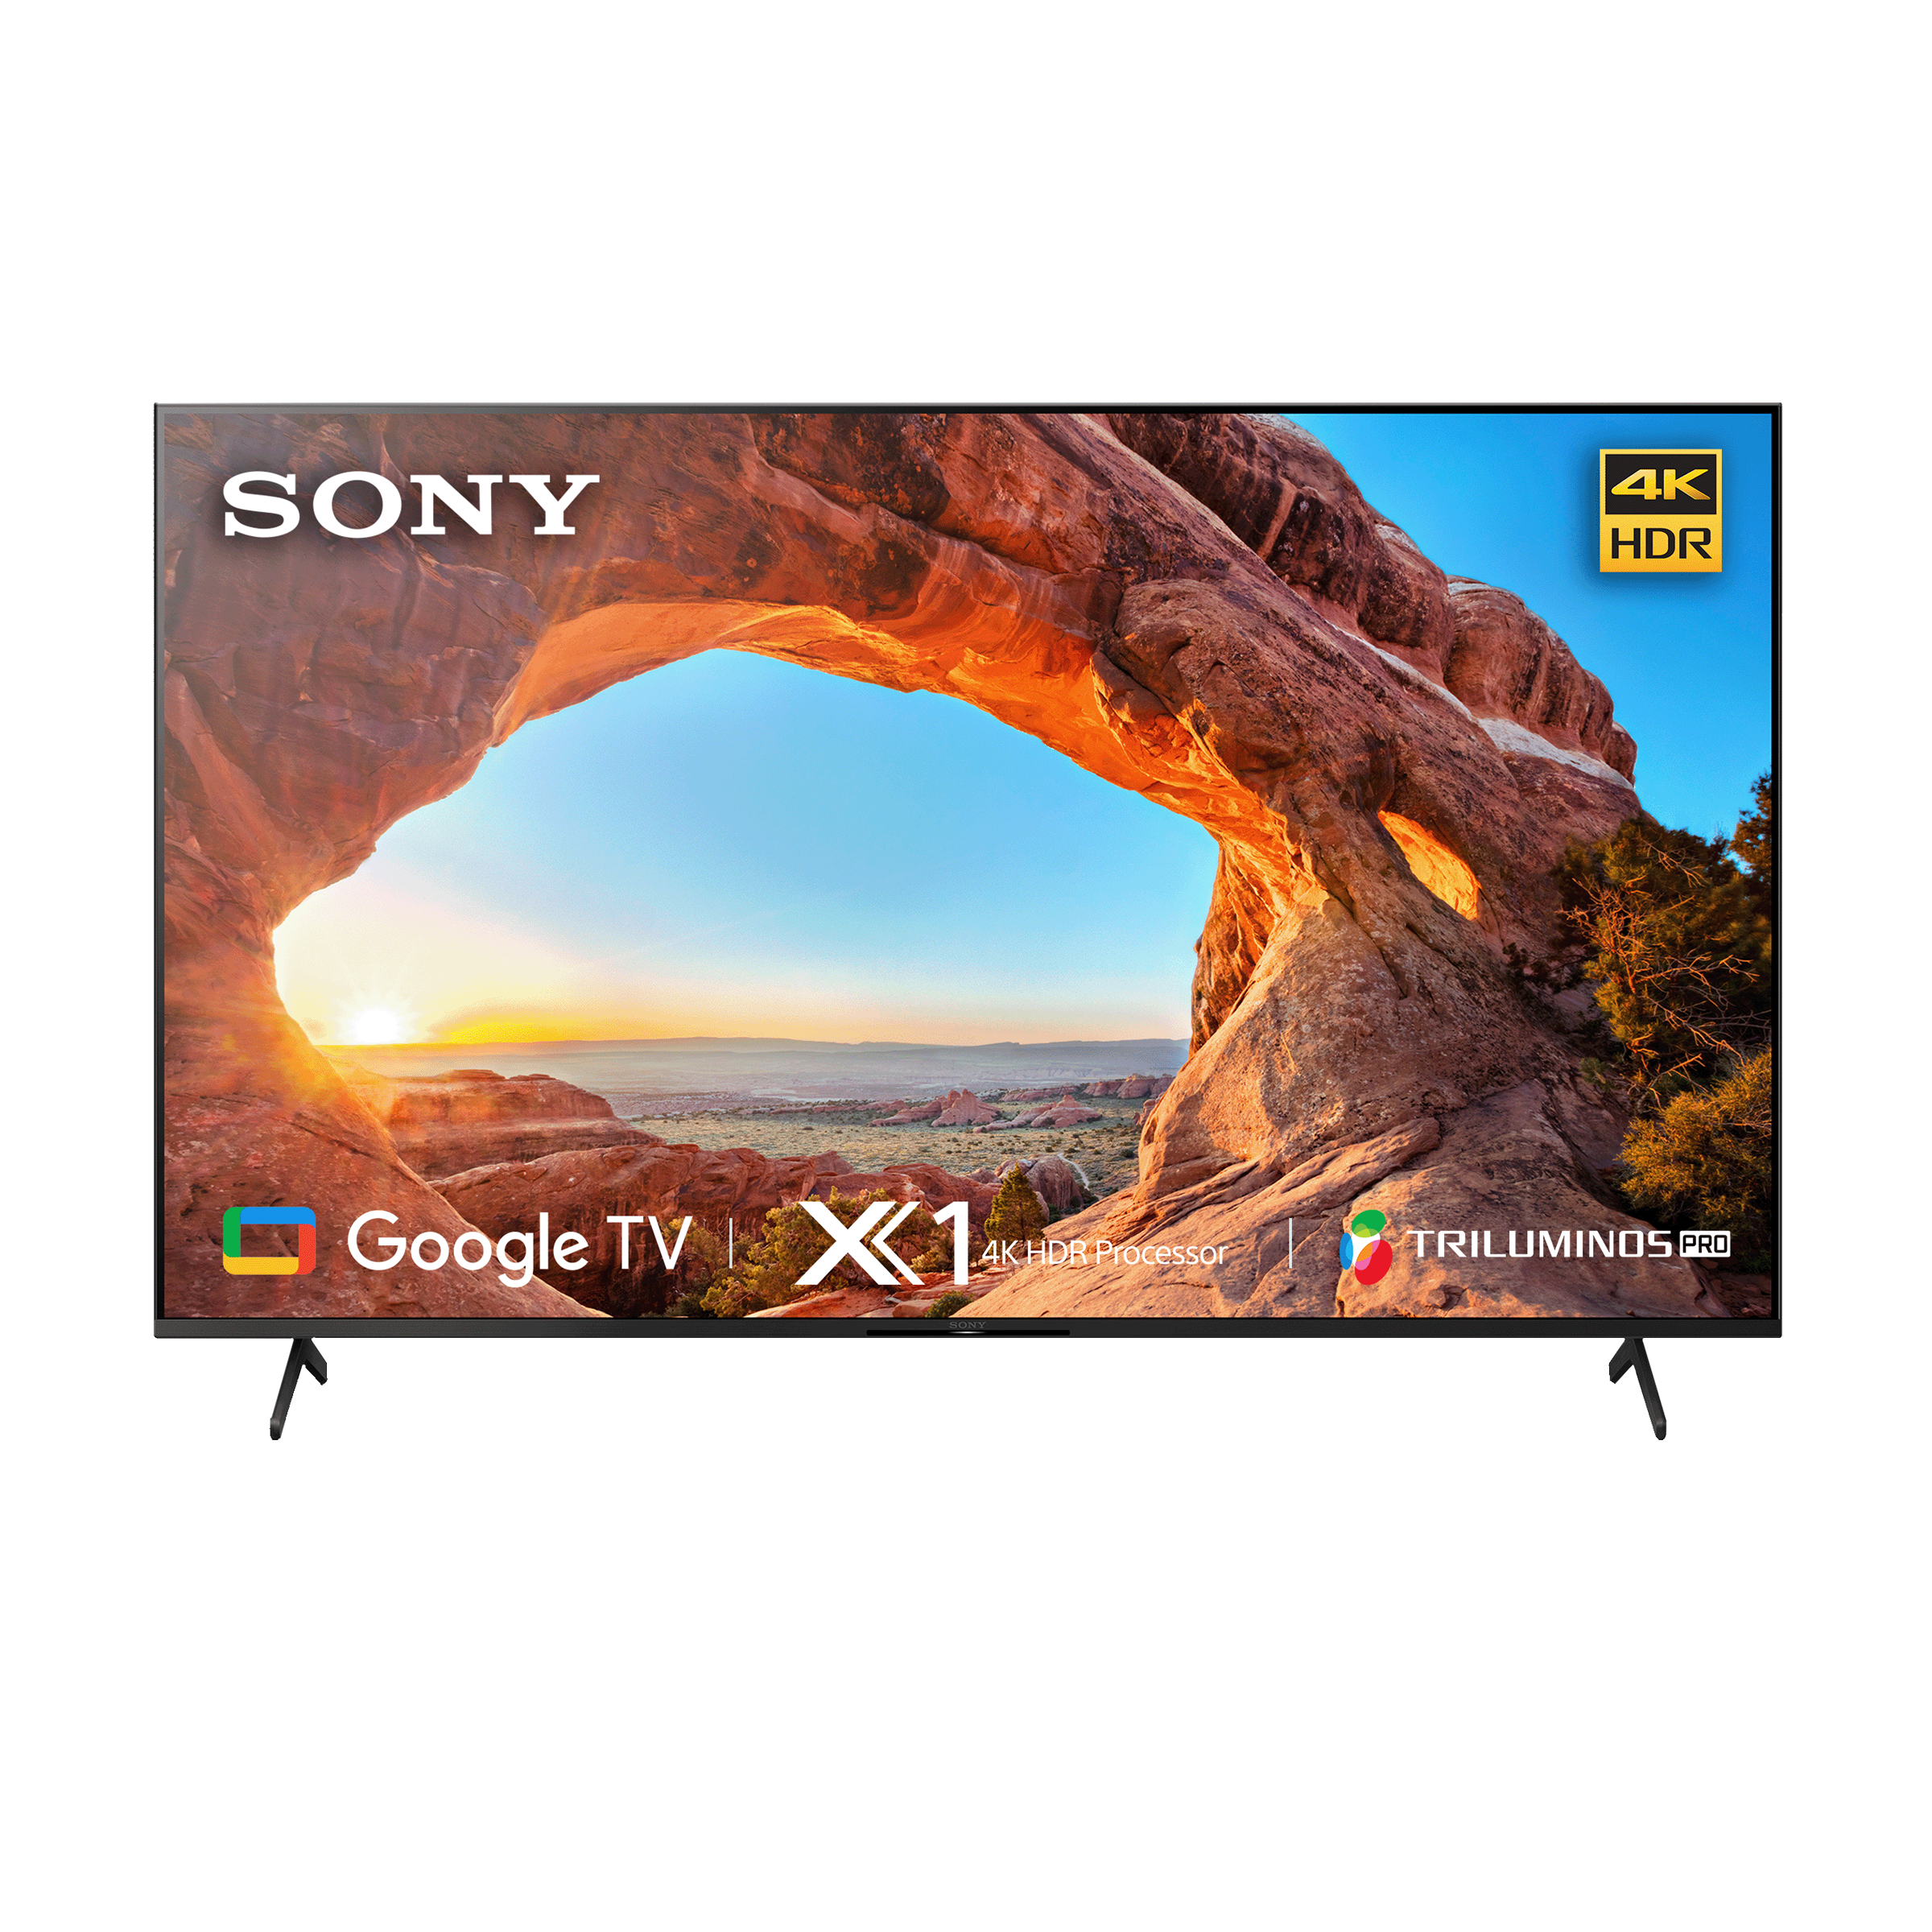 SONY Bravia X85J 139 cm (55 inch) 4K Ultra HD LED Android TV with Alexa Compatibility (2021 model)_1